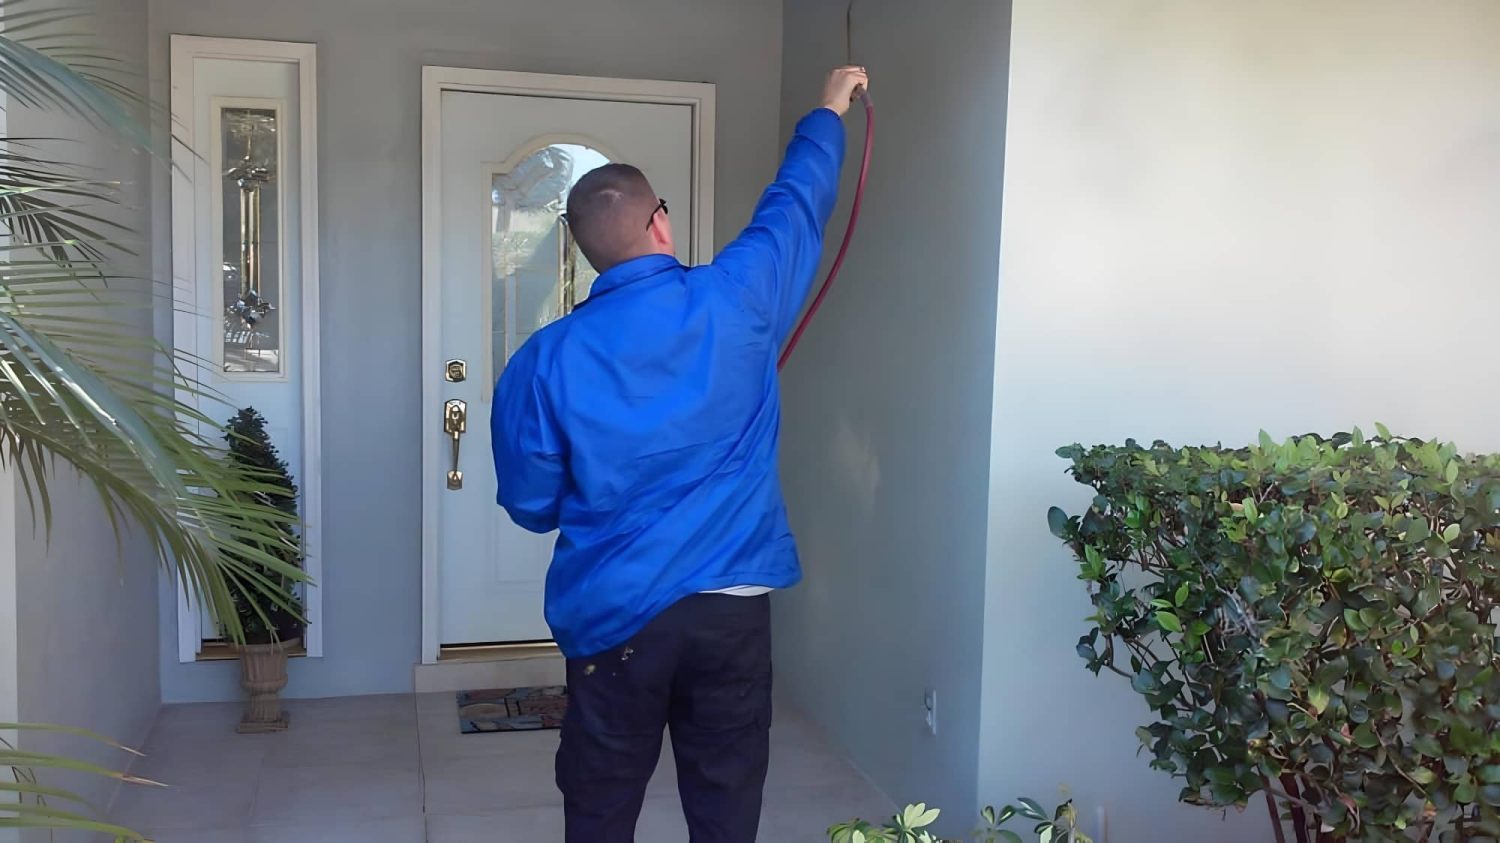 Pest control service treating exterior of home in Clearwater